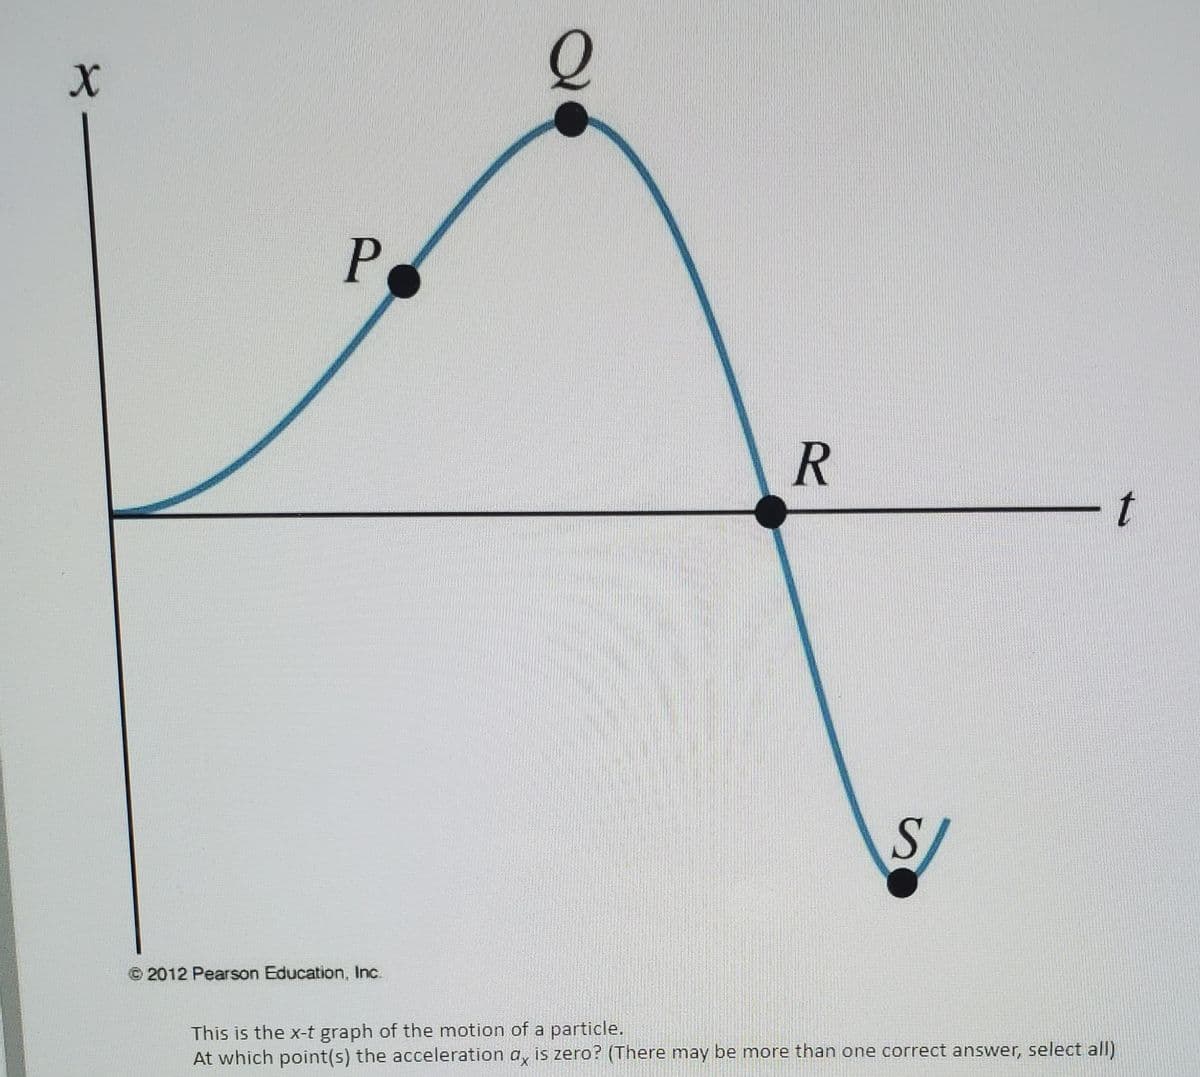 P
S/
© 2012 Pearson Education, Inc.
This is the x-t graph of the motion of a particle.
At which point(s) the acceleration a, is zero? (There may be more than one correct answer, select all)
